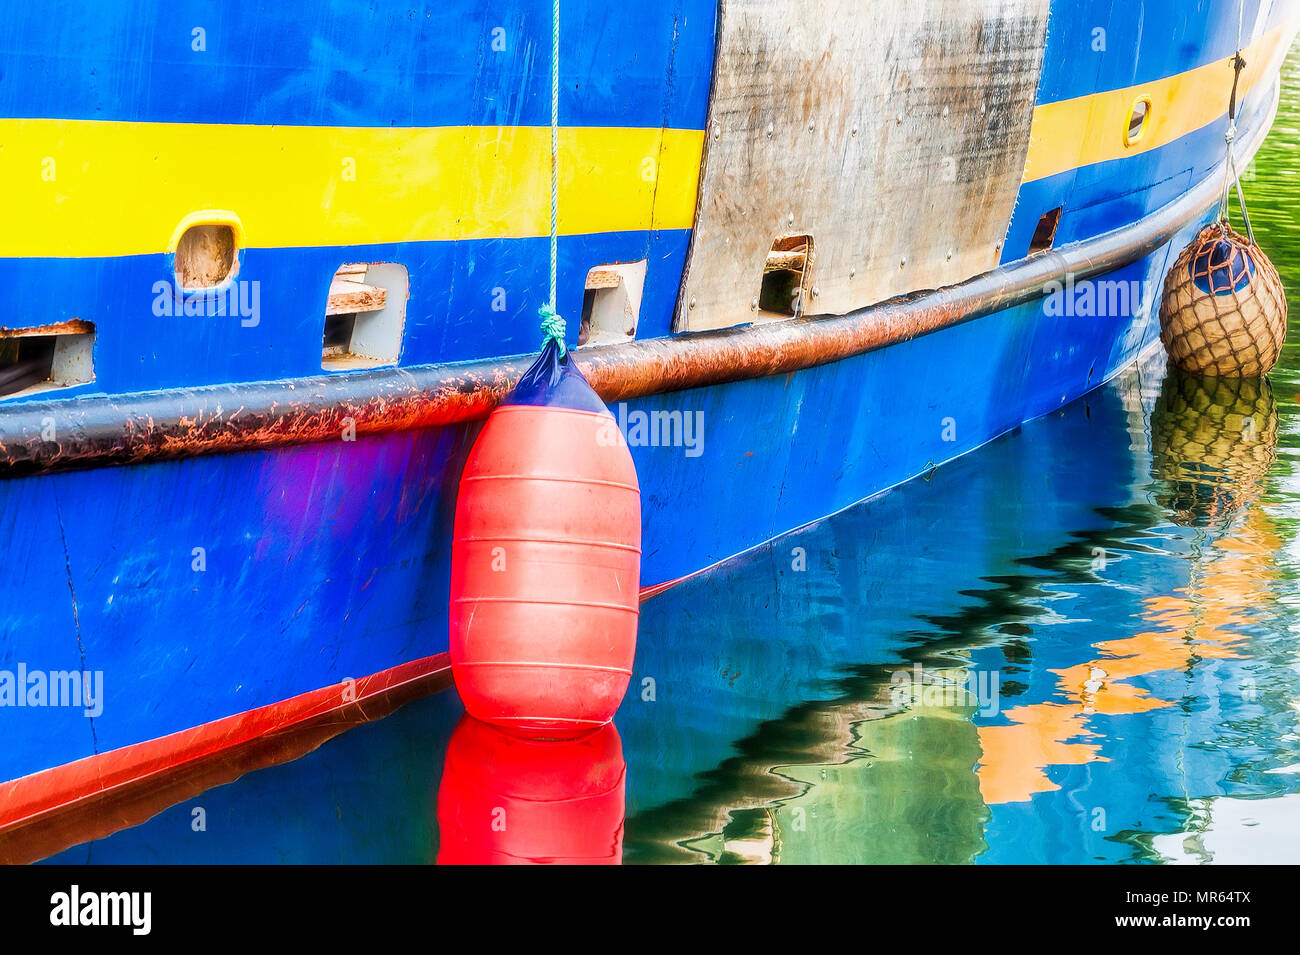 Orange and yellow bouys hang from ropes over the side of a blue and yellow boat.  Their reflections are seen in the sea water. Stock Photo